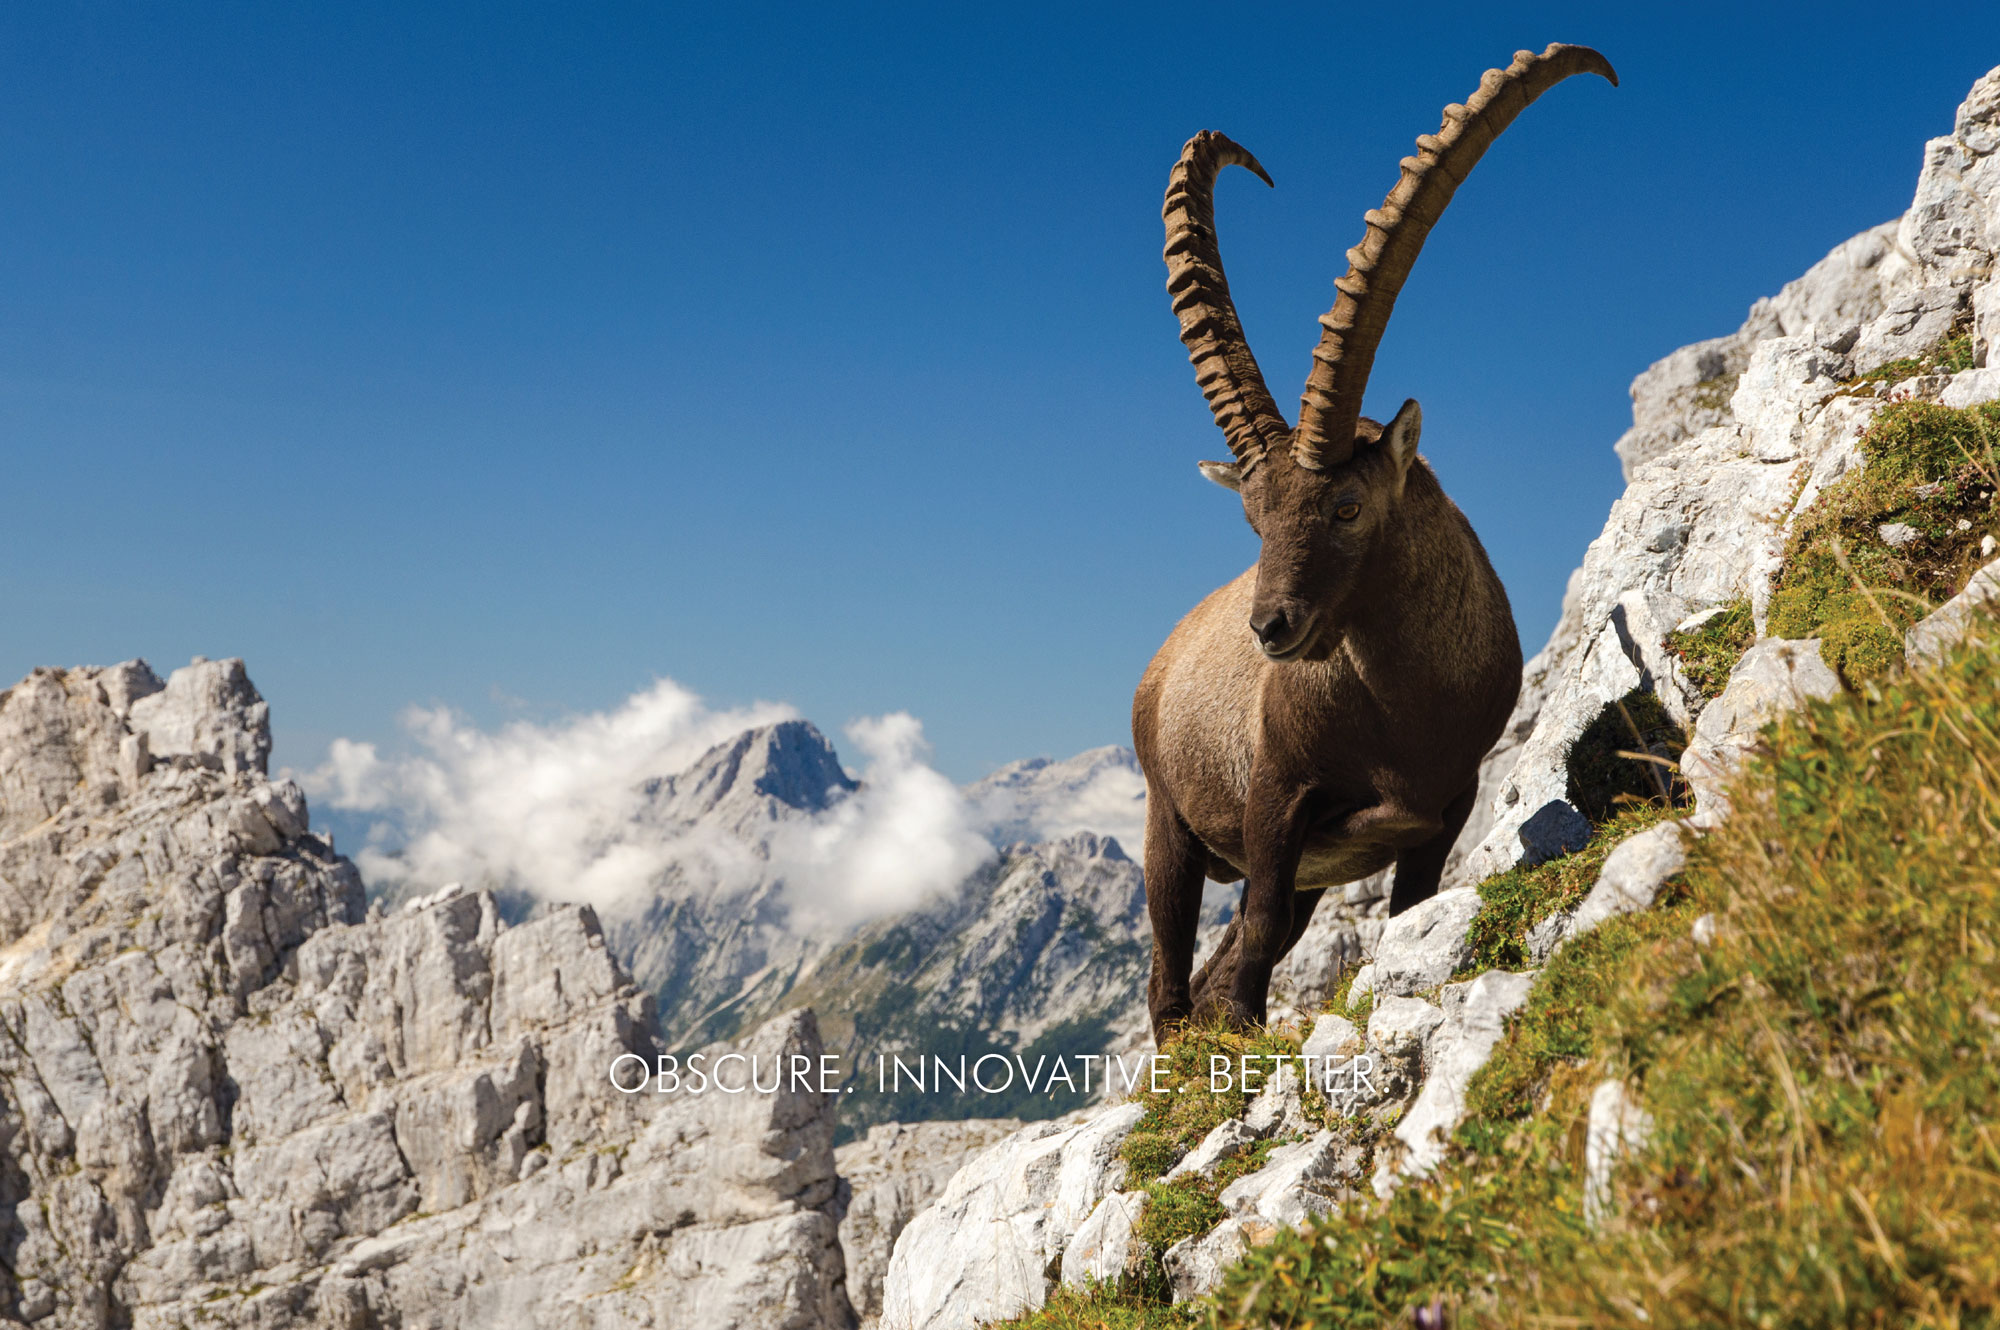 Ibex-Home-Page_08-21-17-1.jpg?format=2500w